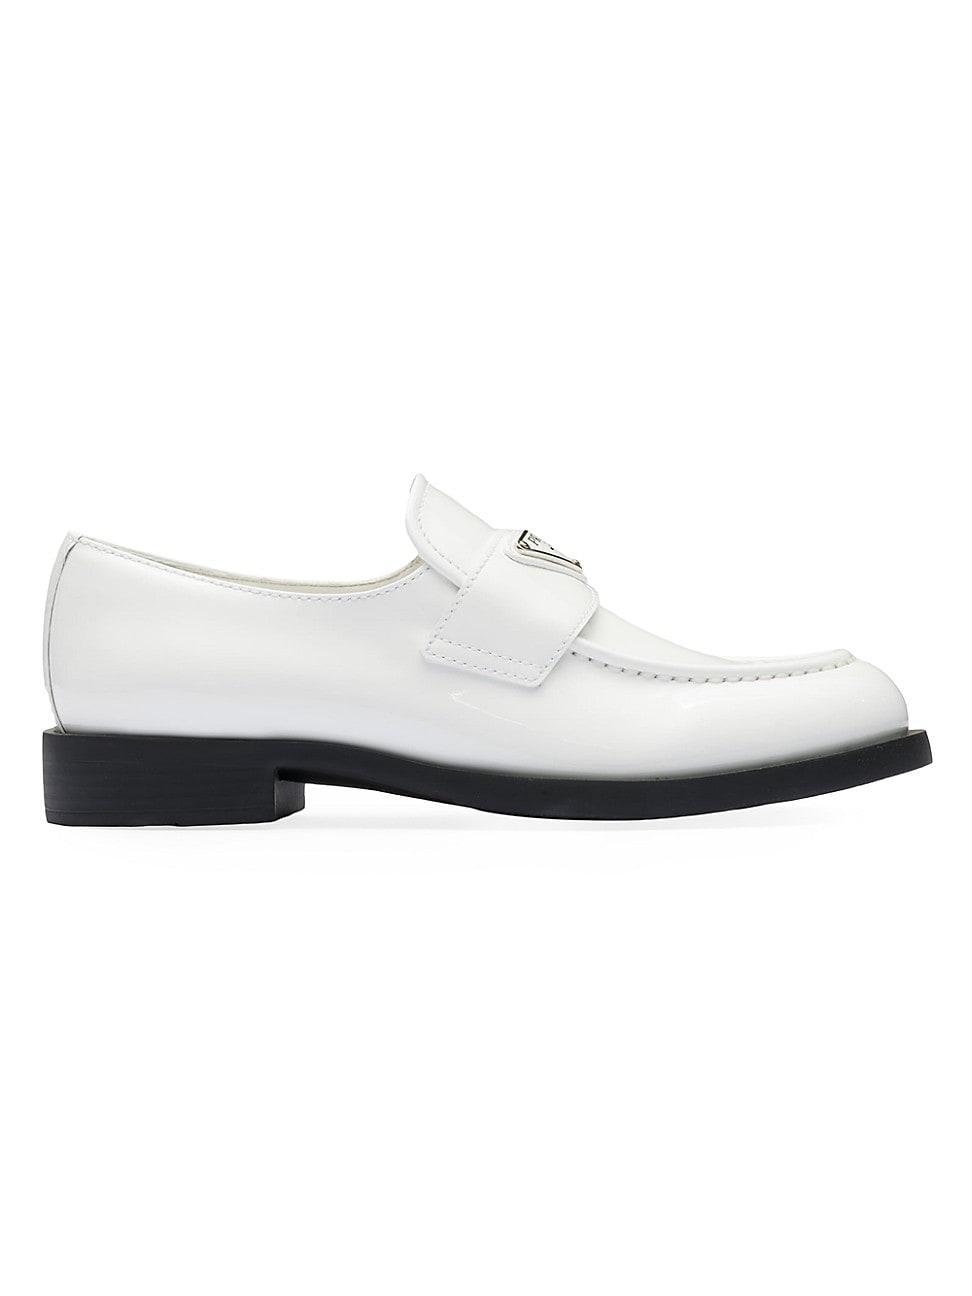 Womens Patent Leather Loafers Product Image